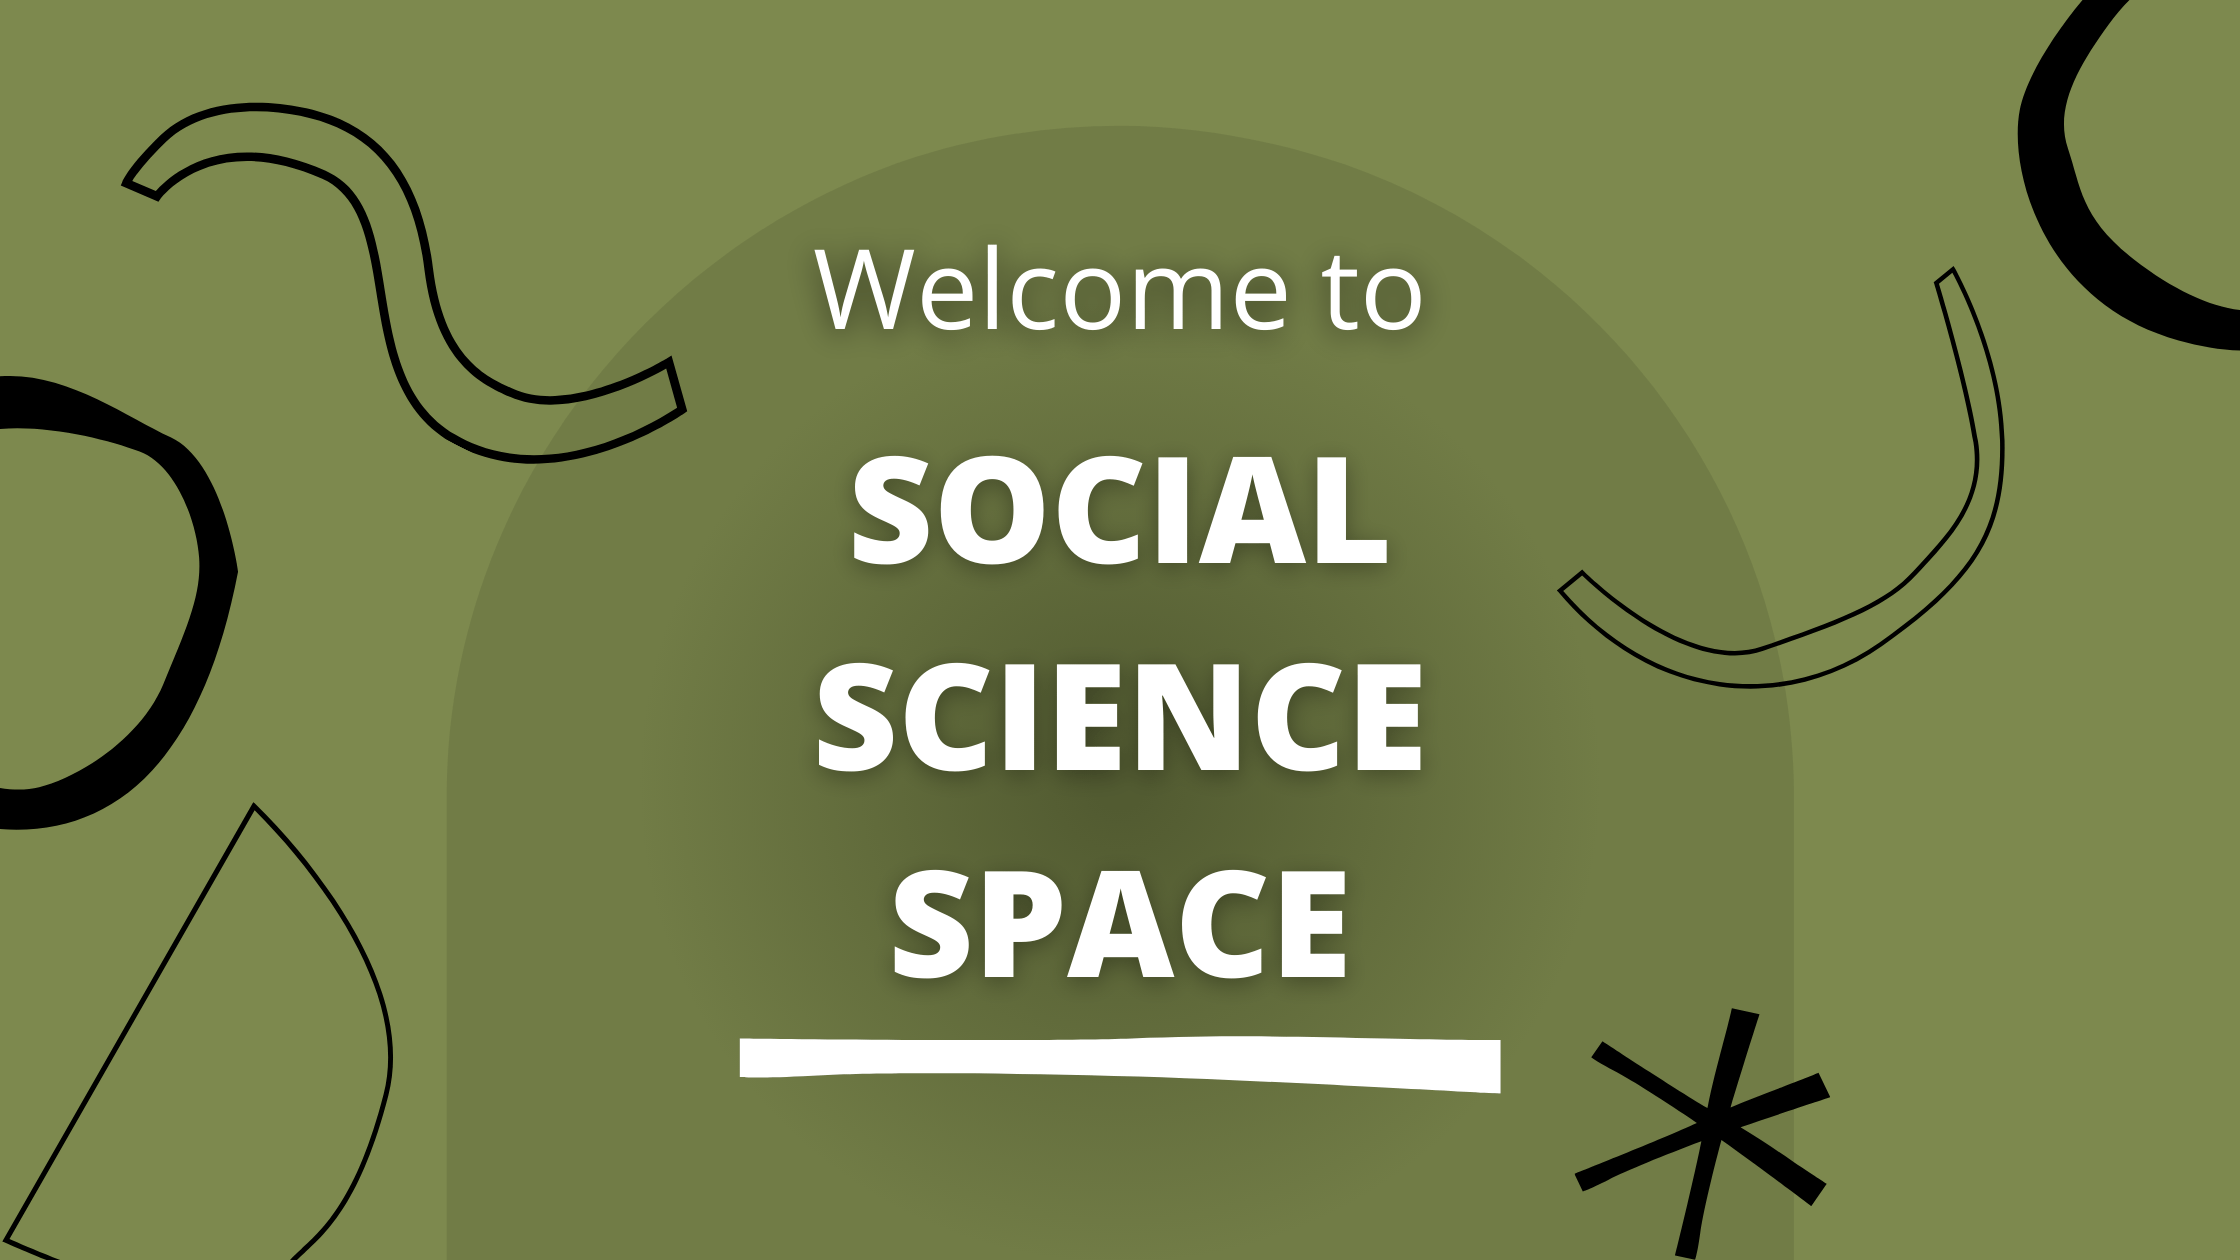 "Welcome to Social Science Space" against olive background